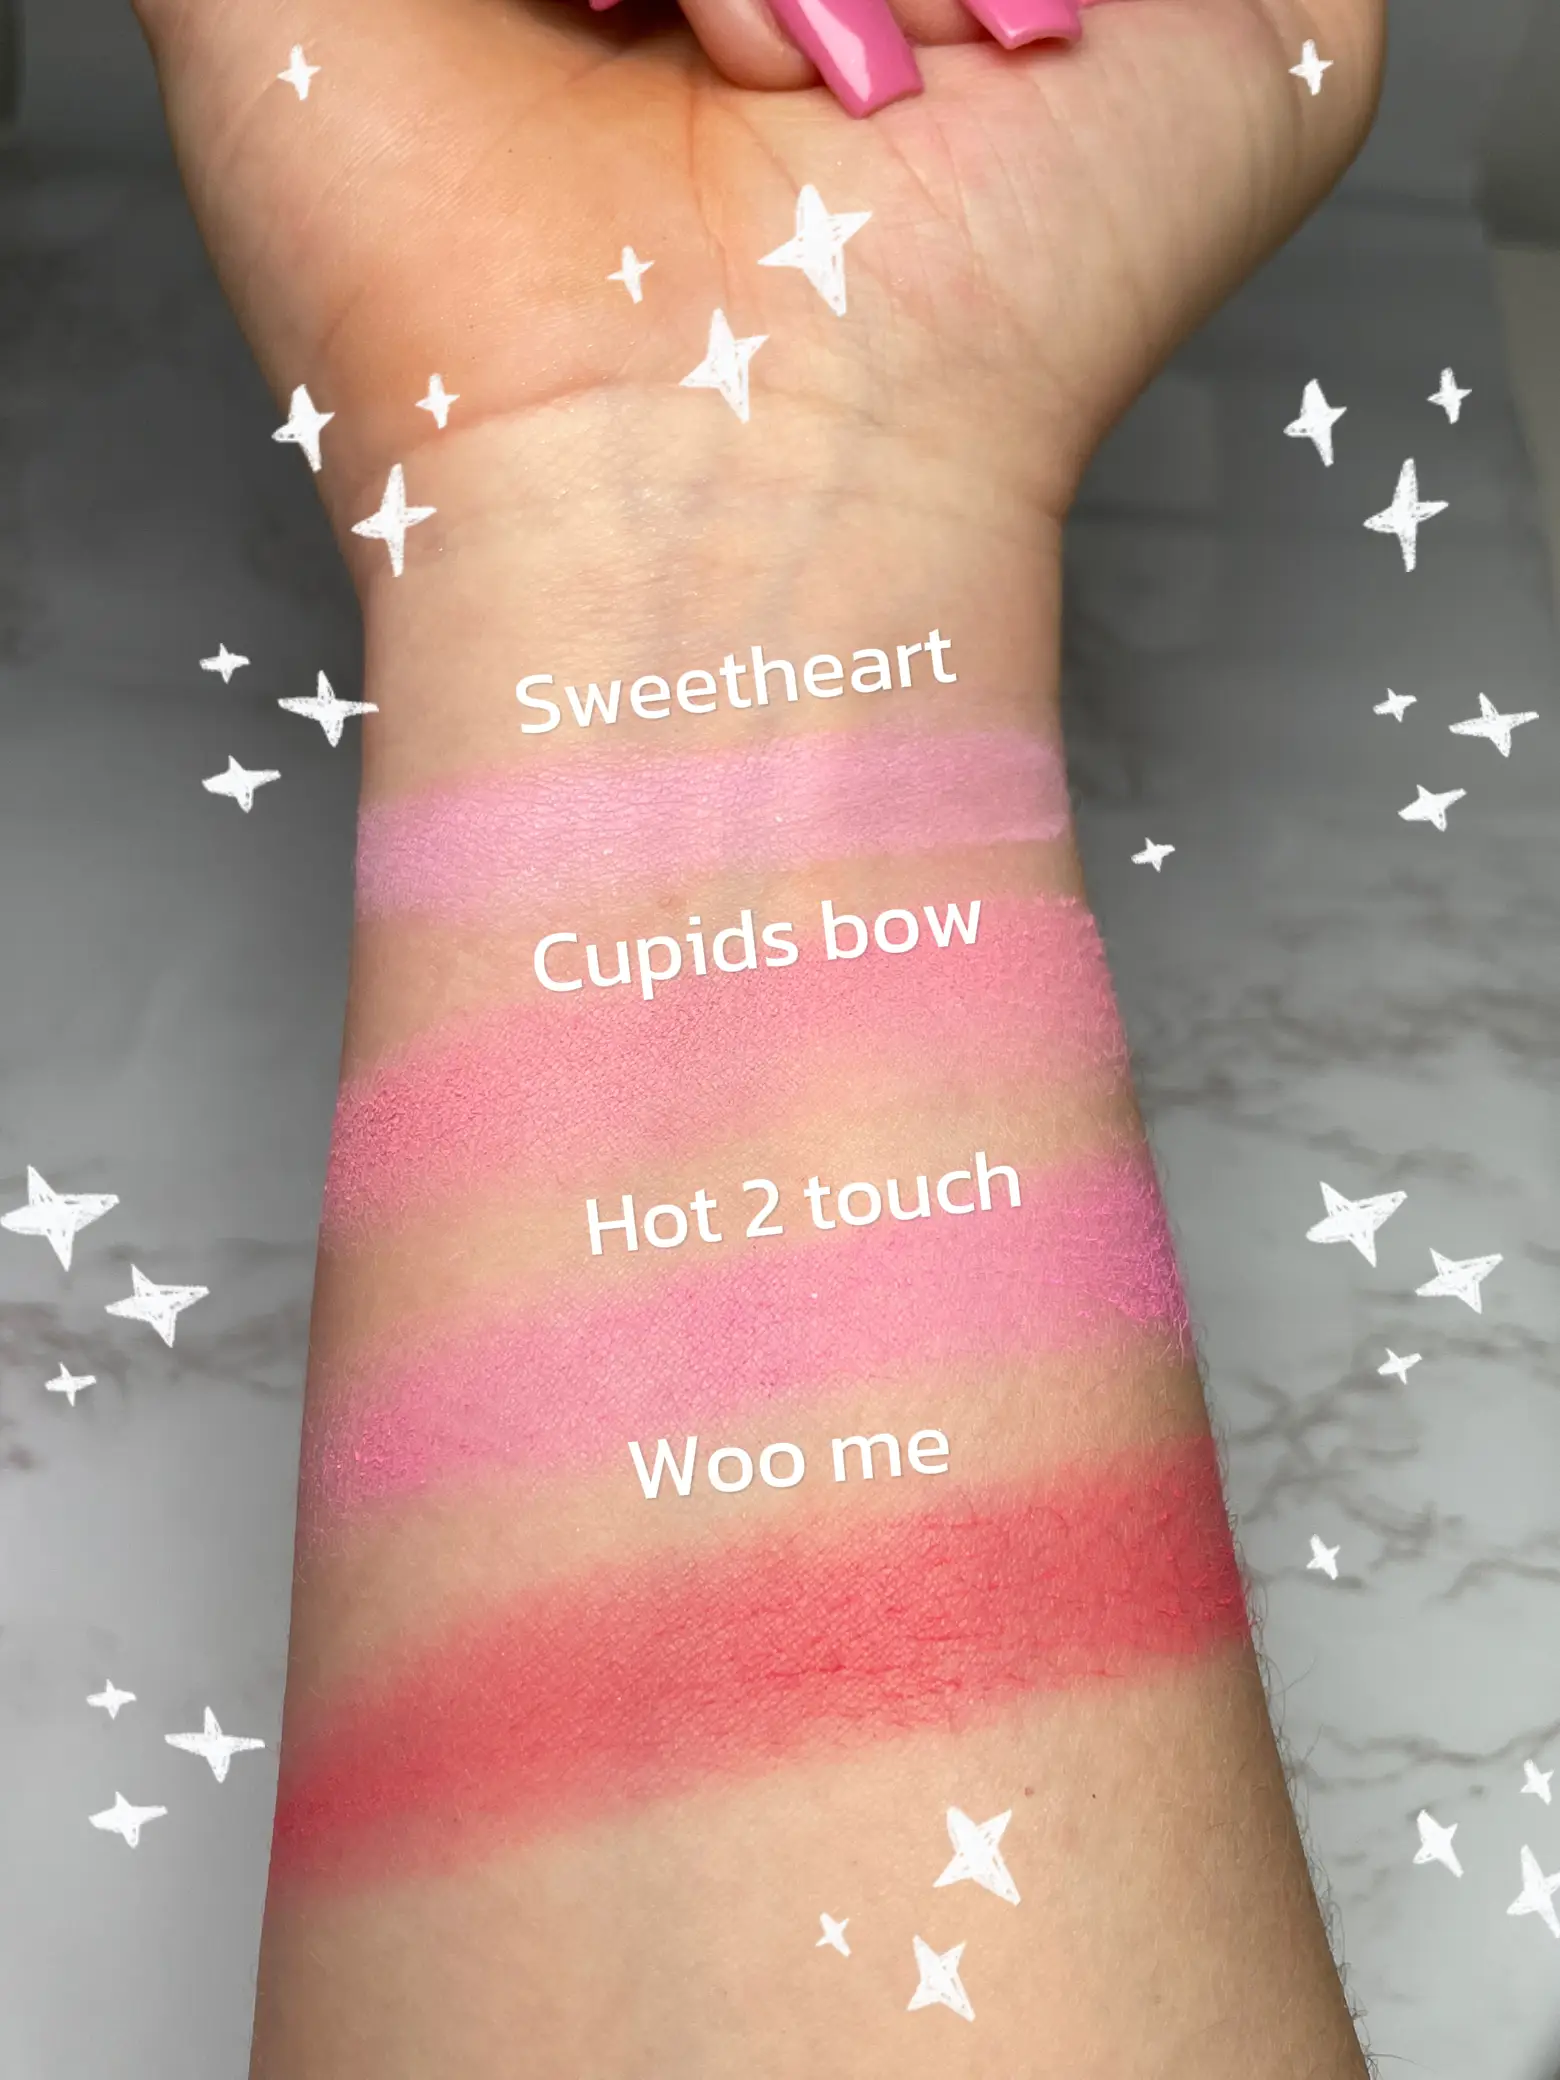 ColourPop Cupid's Bow Pressed Powder Blush Review & Swatches